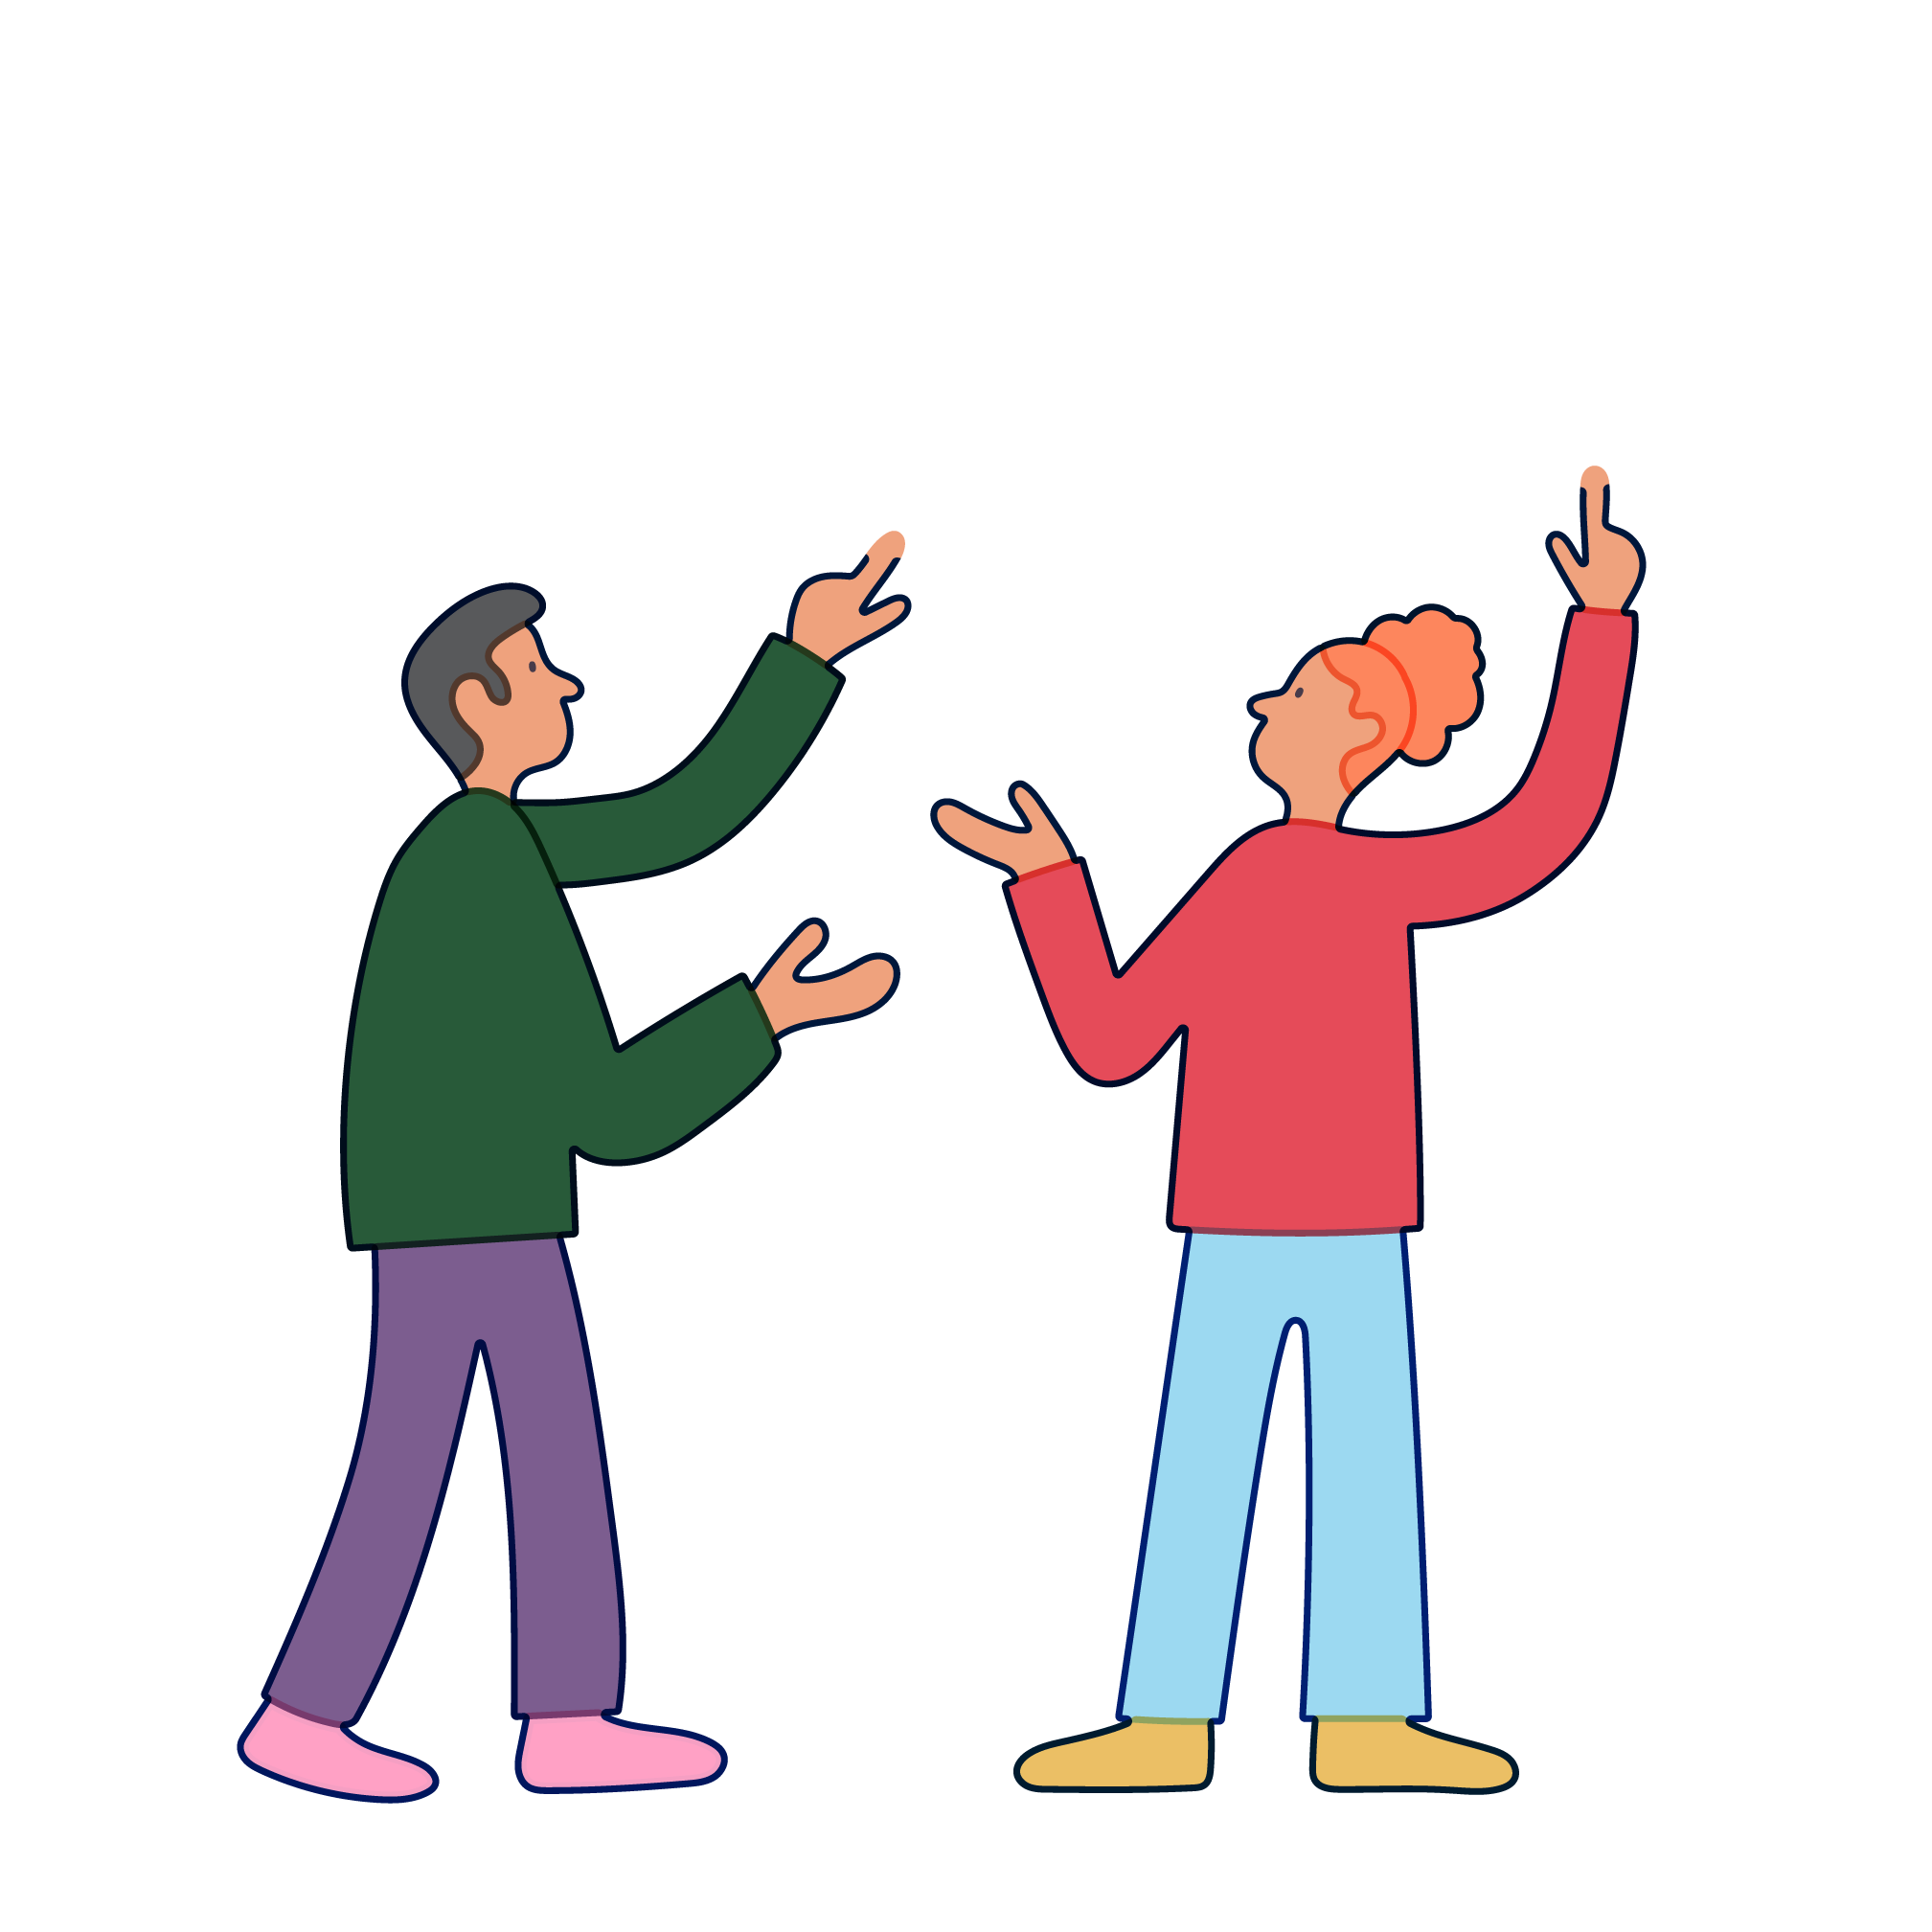 Two people have an animated conversation with empty speech bubbles hovering over them.